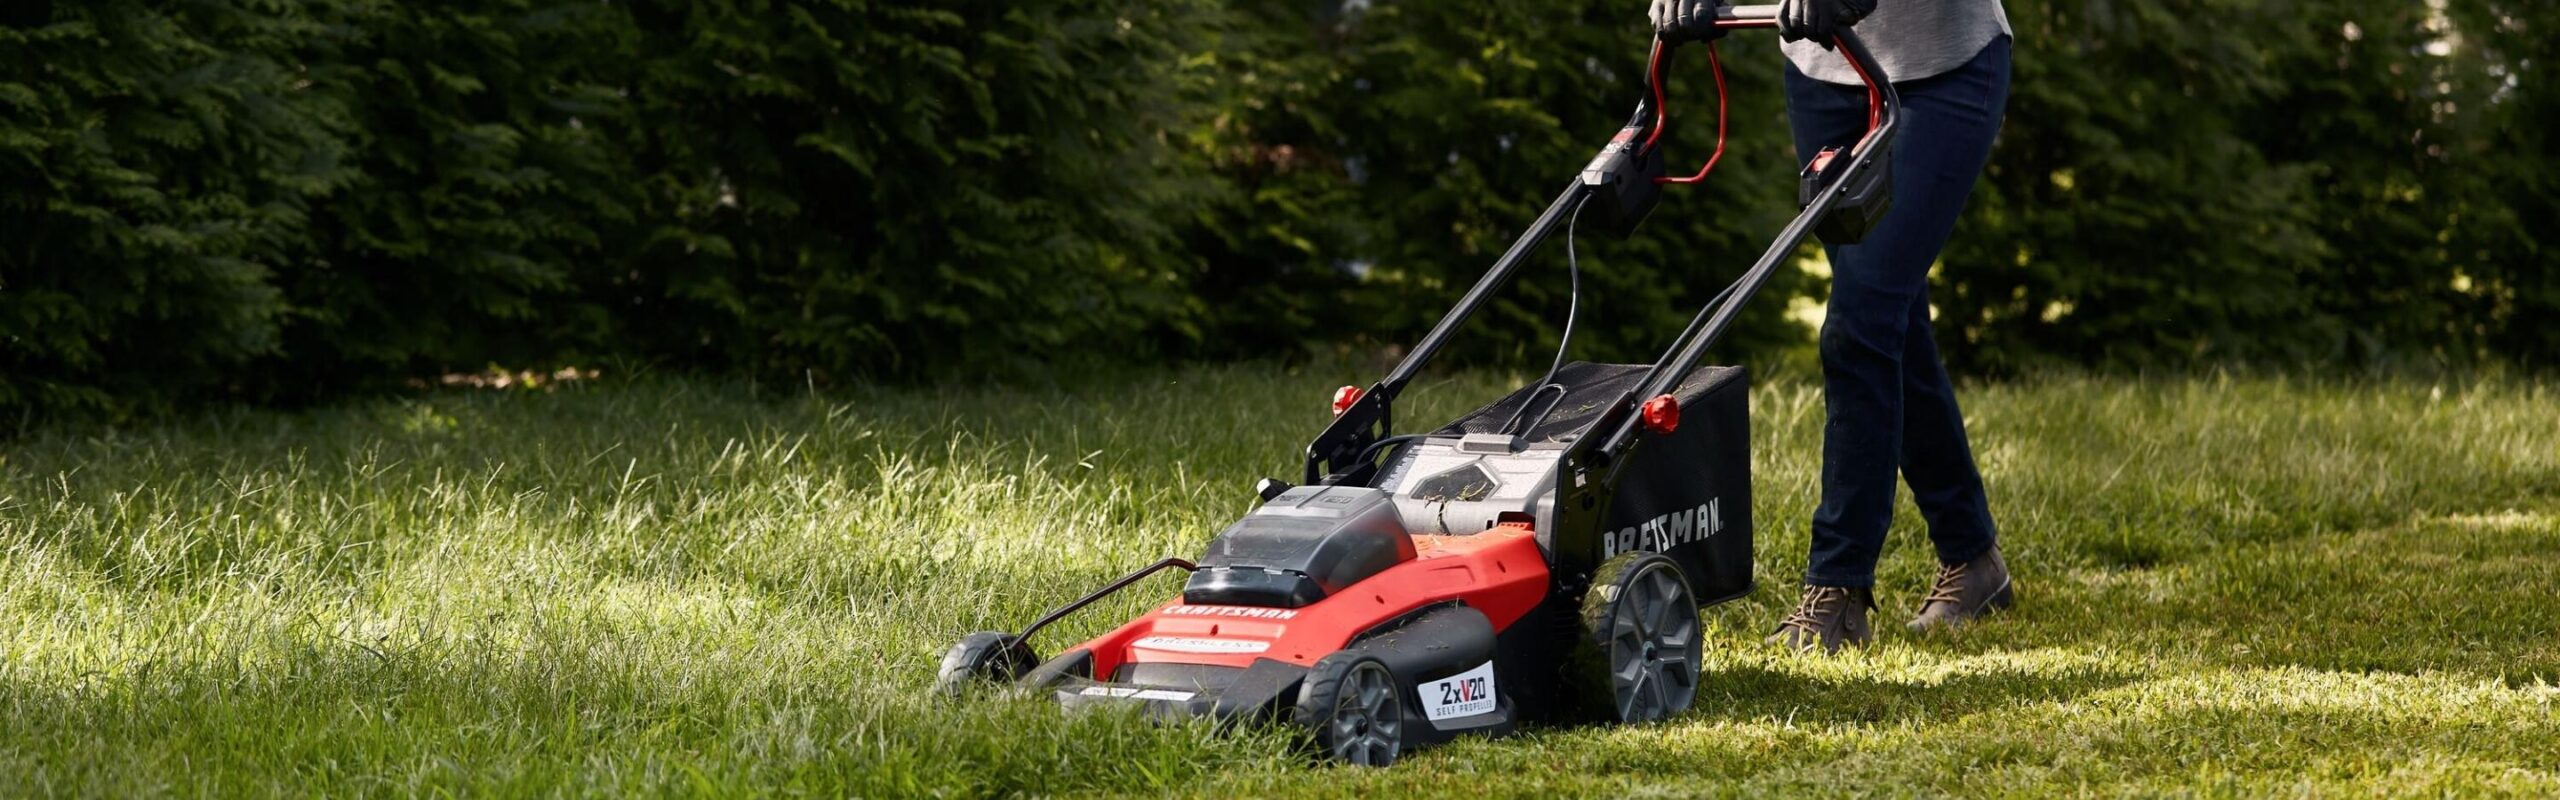 Most Trusted Lawn Mower Brands - Craftsman